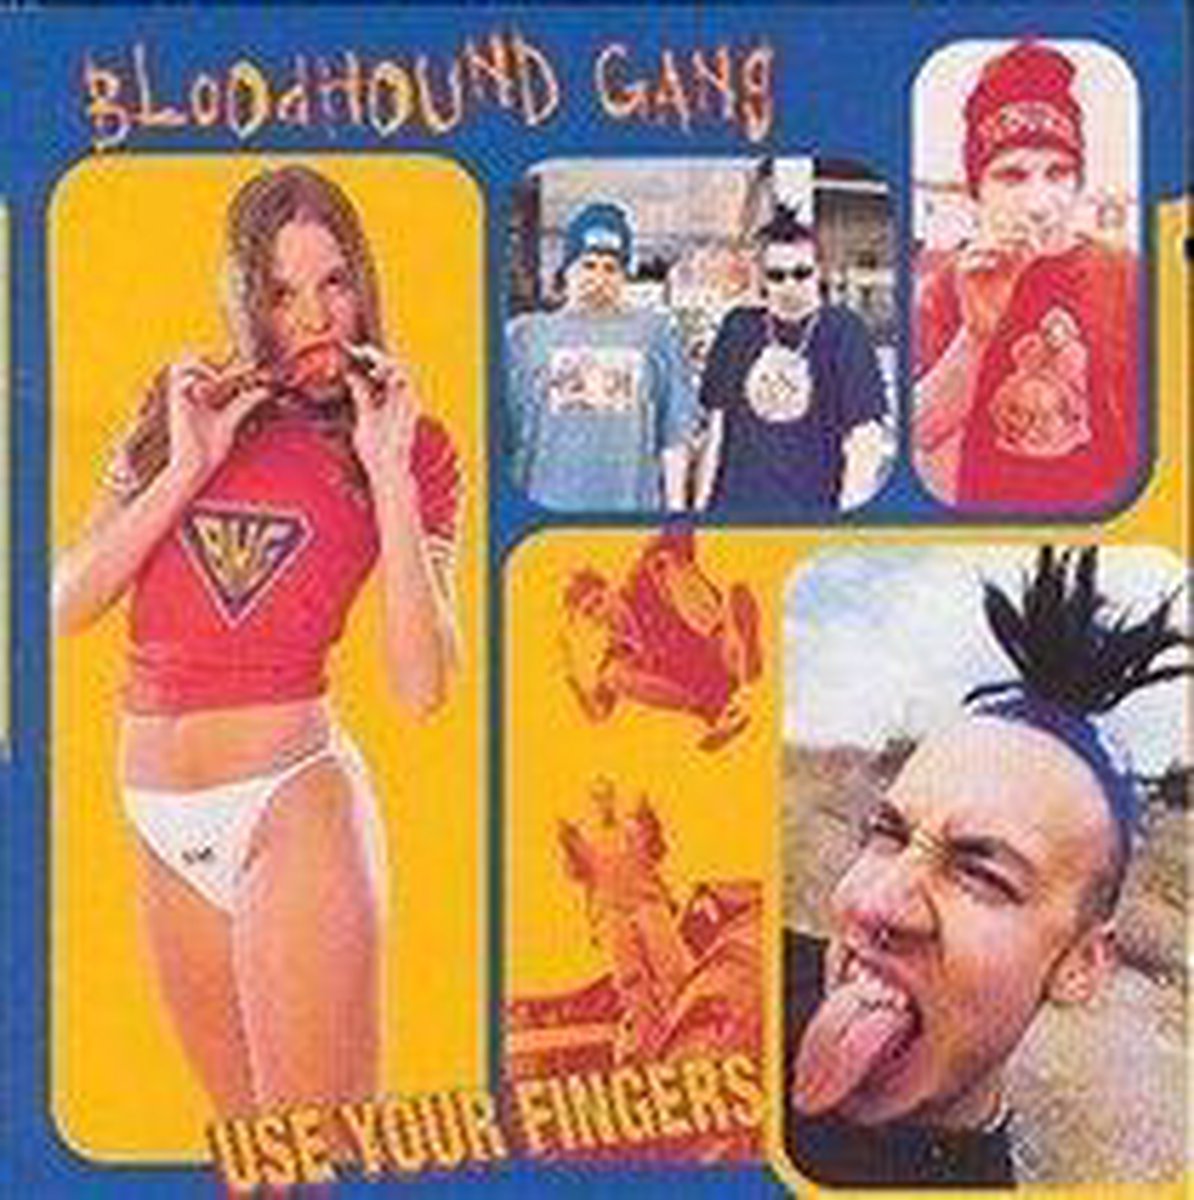 Use Your Fingers - The Bloodhound Gang